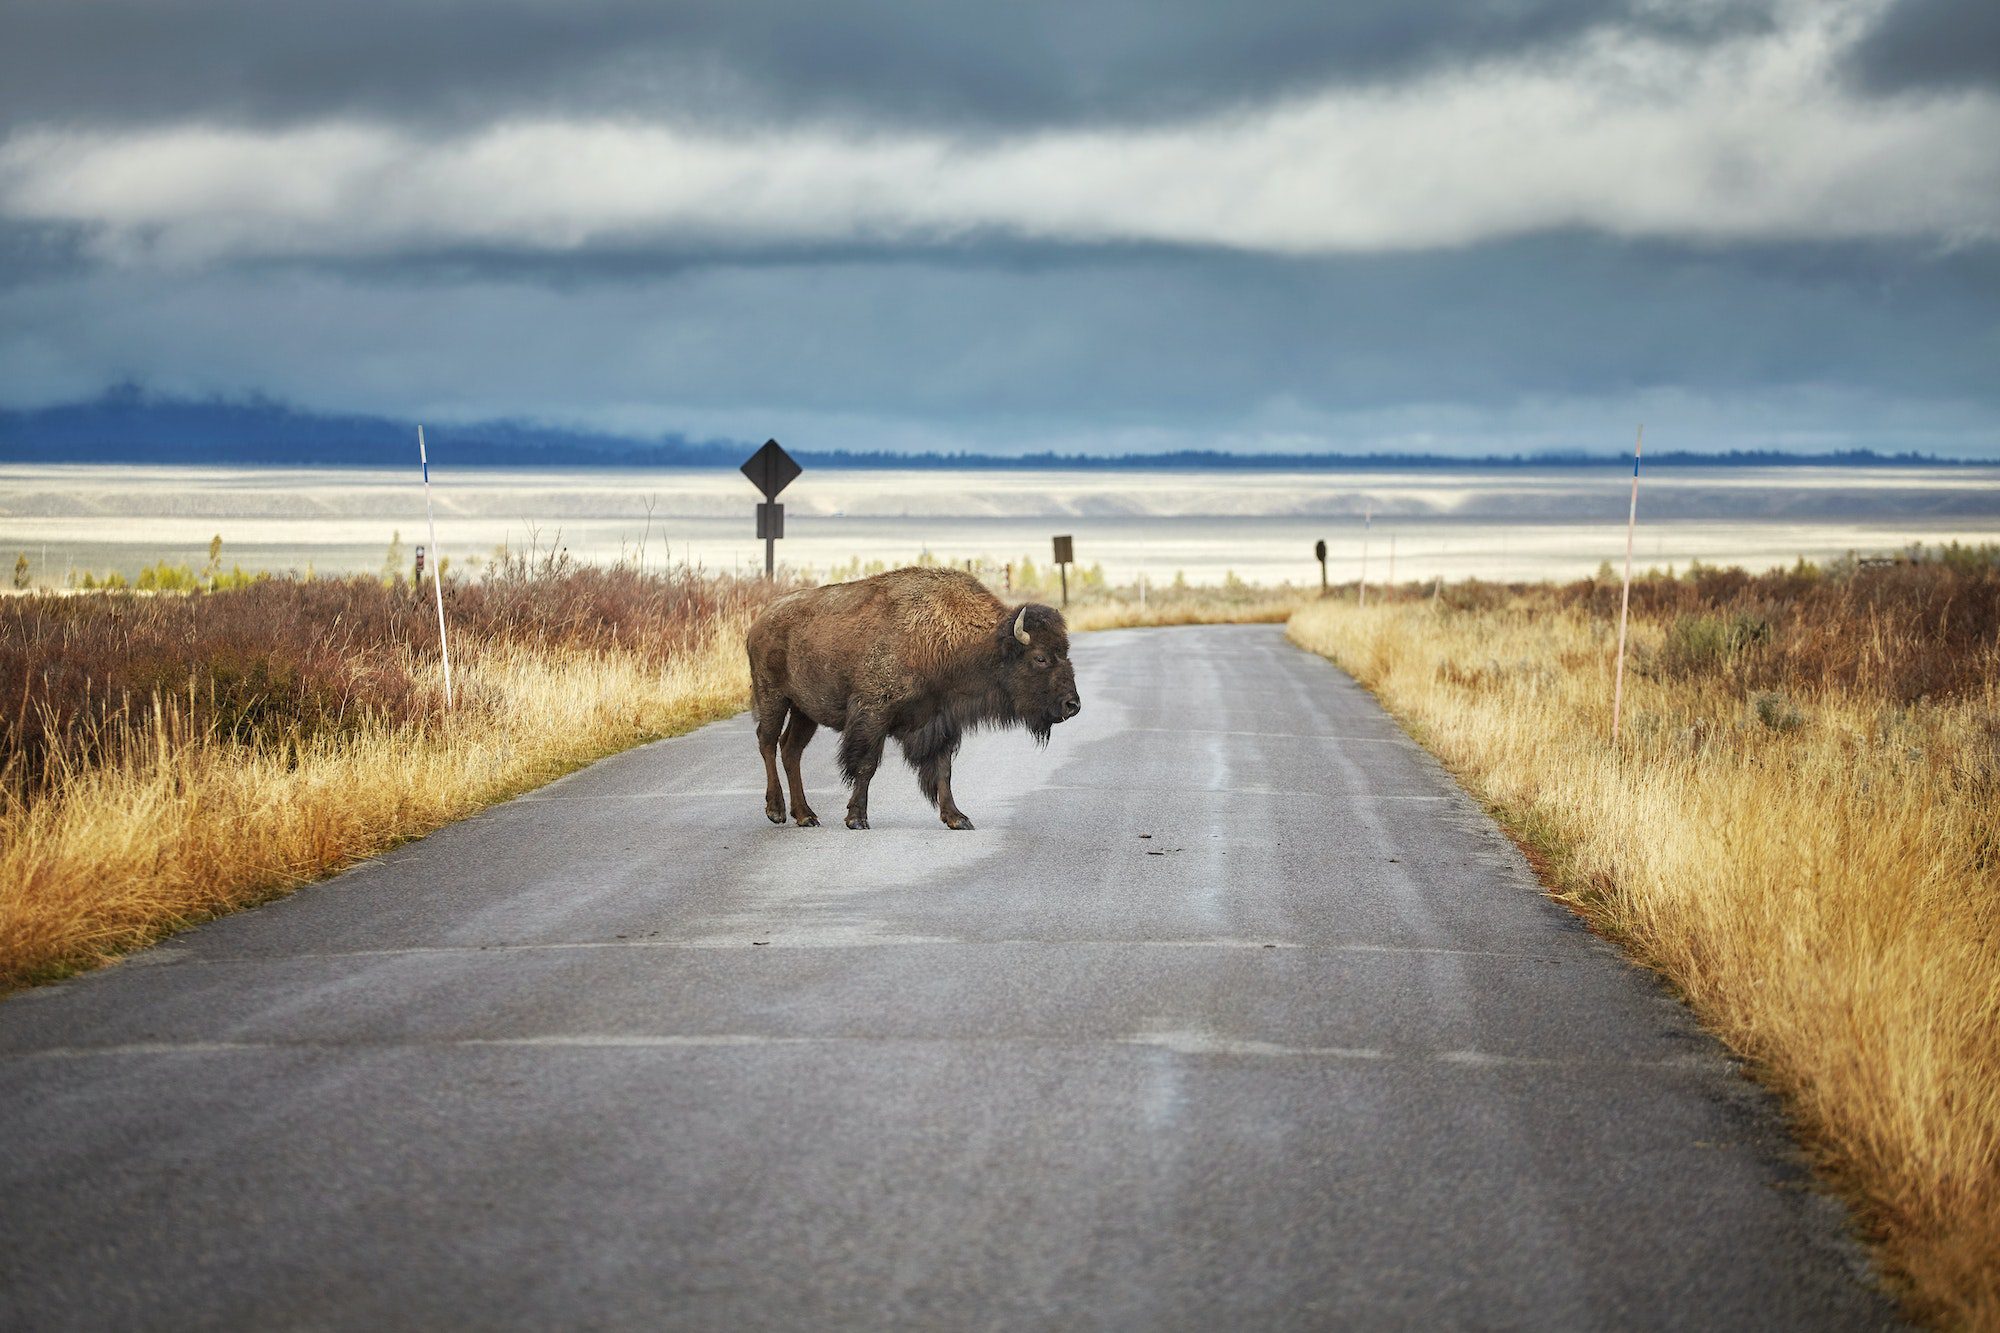 Bison on road in Grand Teton National Park, Wyoming, USA.